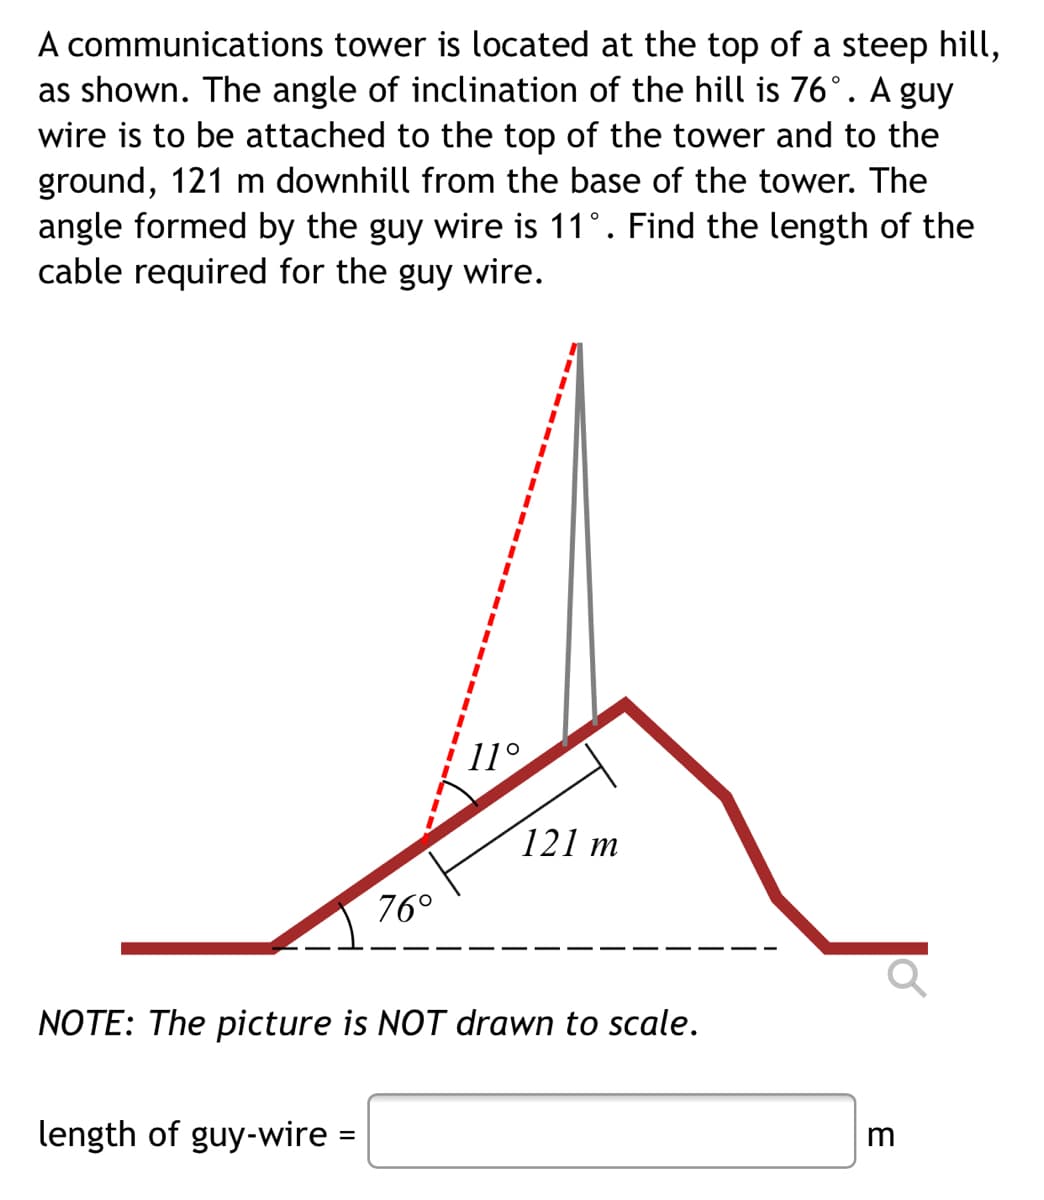 A communications tower is located at the top of a steep hill,
as shown. The angle of inclination of the hill is 76°. A guy
wire is to be attached to the top of the tower and to the
ground, 121 m downhill from the base of the tower. The
angle formed by the guy wire is 11°. Find the length of the
cable required for the guy wire.
3D
%3D
11°
121 m
76°
NOTE: The picture is NOT drawn to scale.
length of guy-wire =
